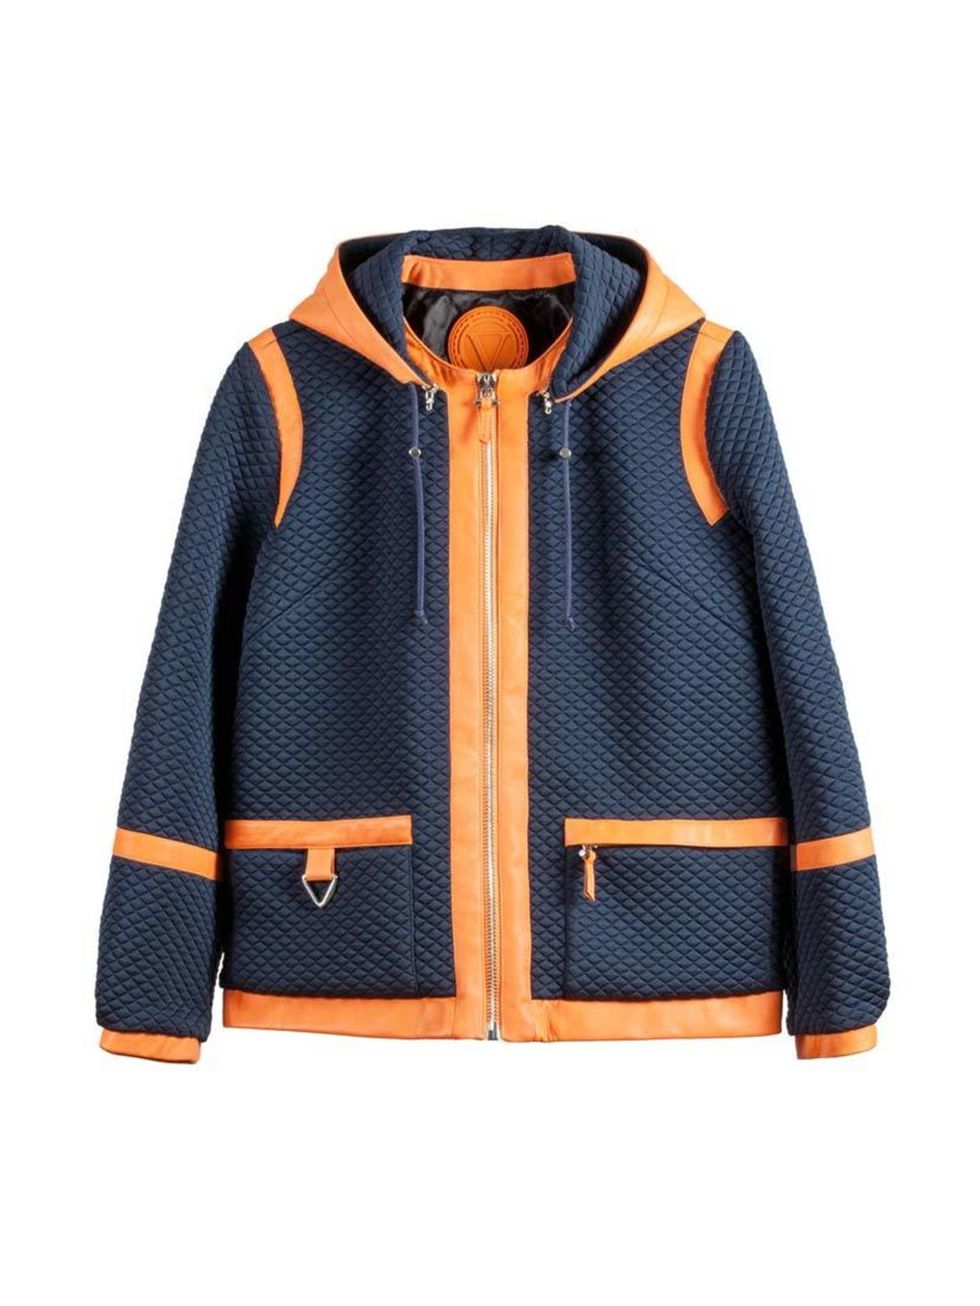 <p>High-tech fabrics and high-vis stripes; it shouldn't work, but it really does.</p>

<p>Les Cinq jacket, £588 at <a href="https://www.wolfandbadger.com/jersey-bomber-blue-orange/" target="_blank">Wolf & Badger</a></p>